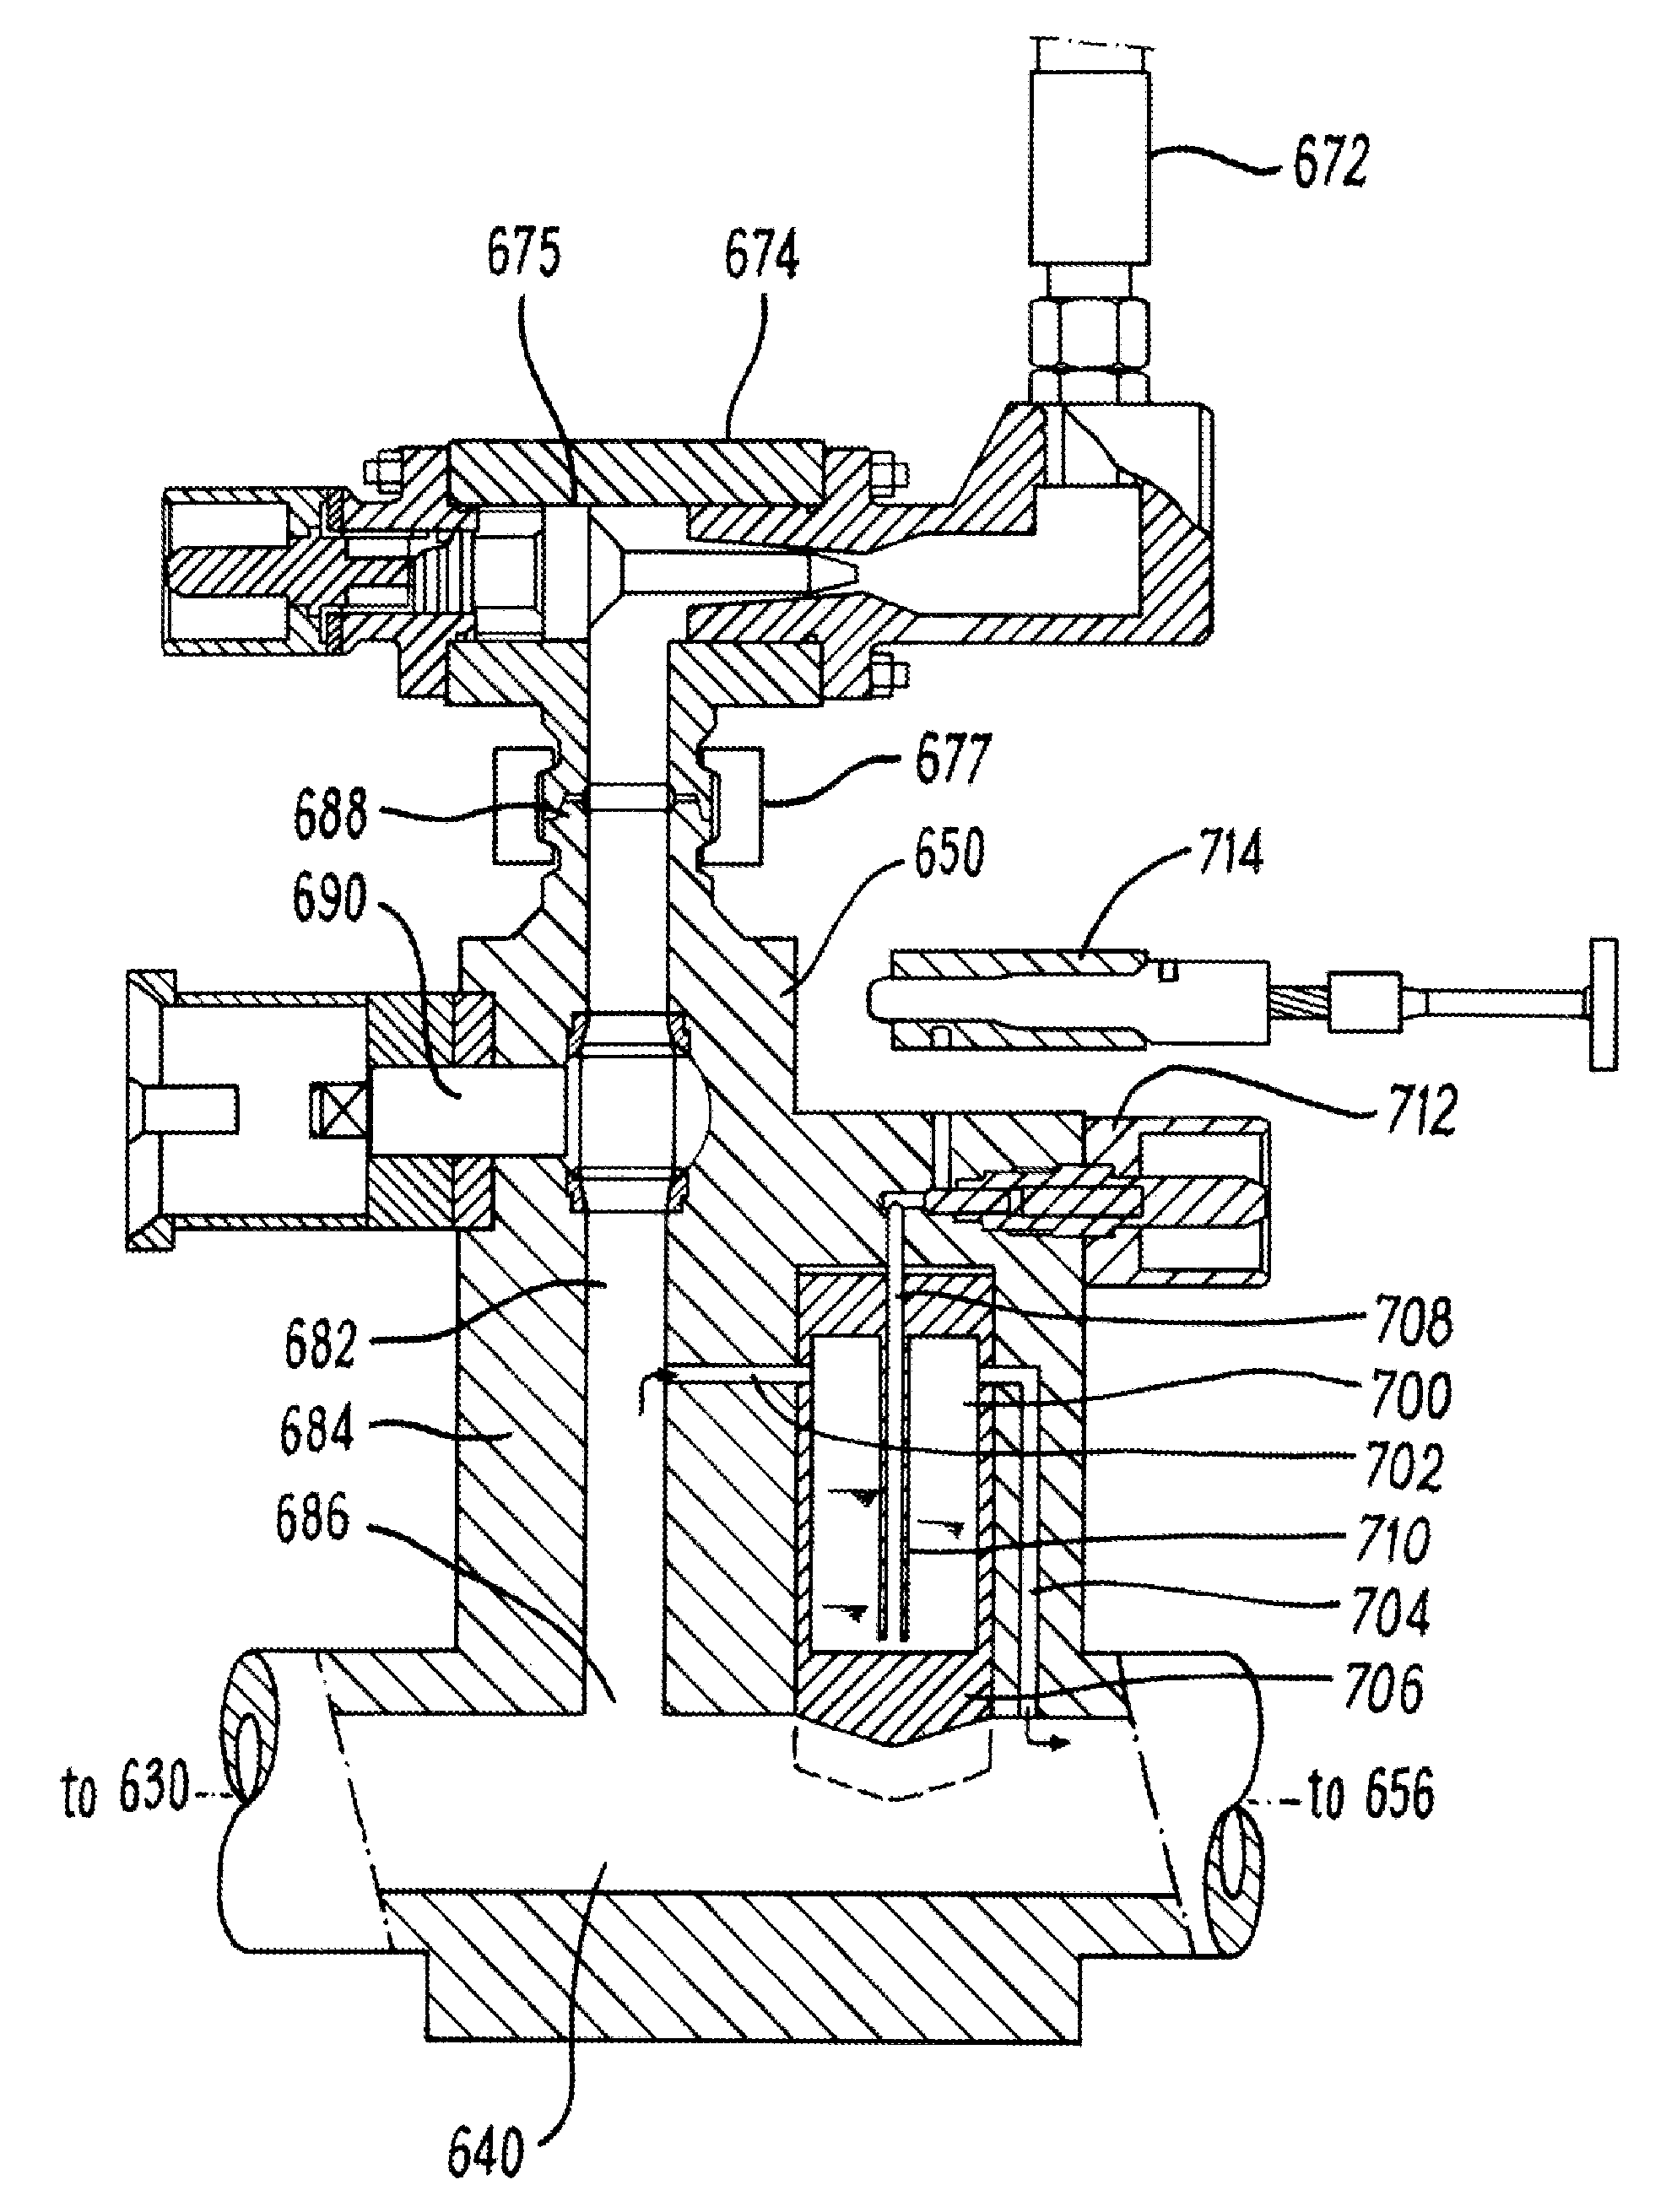 Oilfield apparatus and methods of use